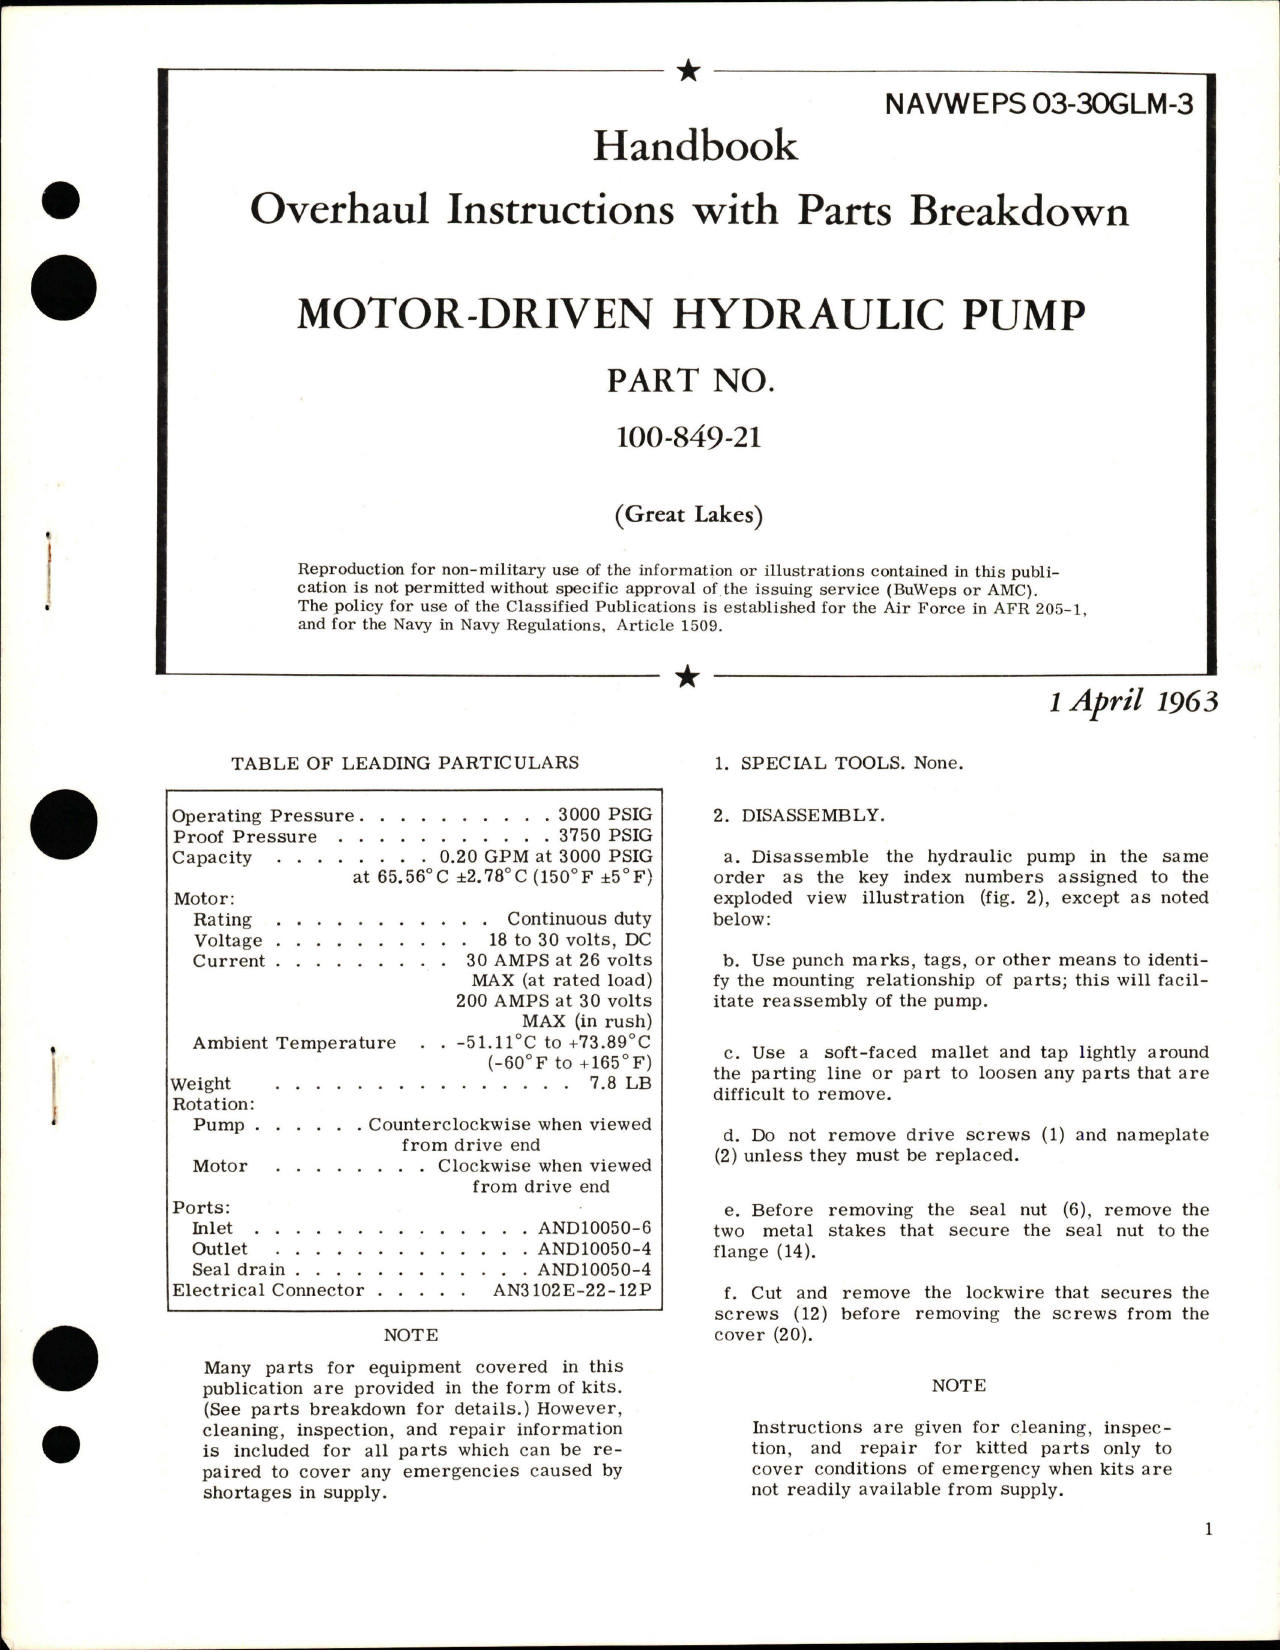 Sample page 1 from AirCorps Library document: Overhaul Instructions with Parts Breakdown for Motor Driven Hydraulic Pump - Part 100-849-21